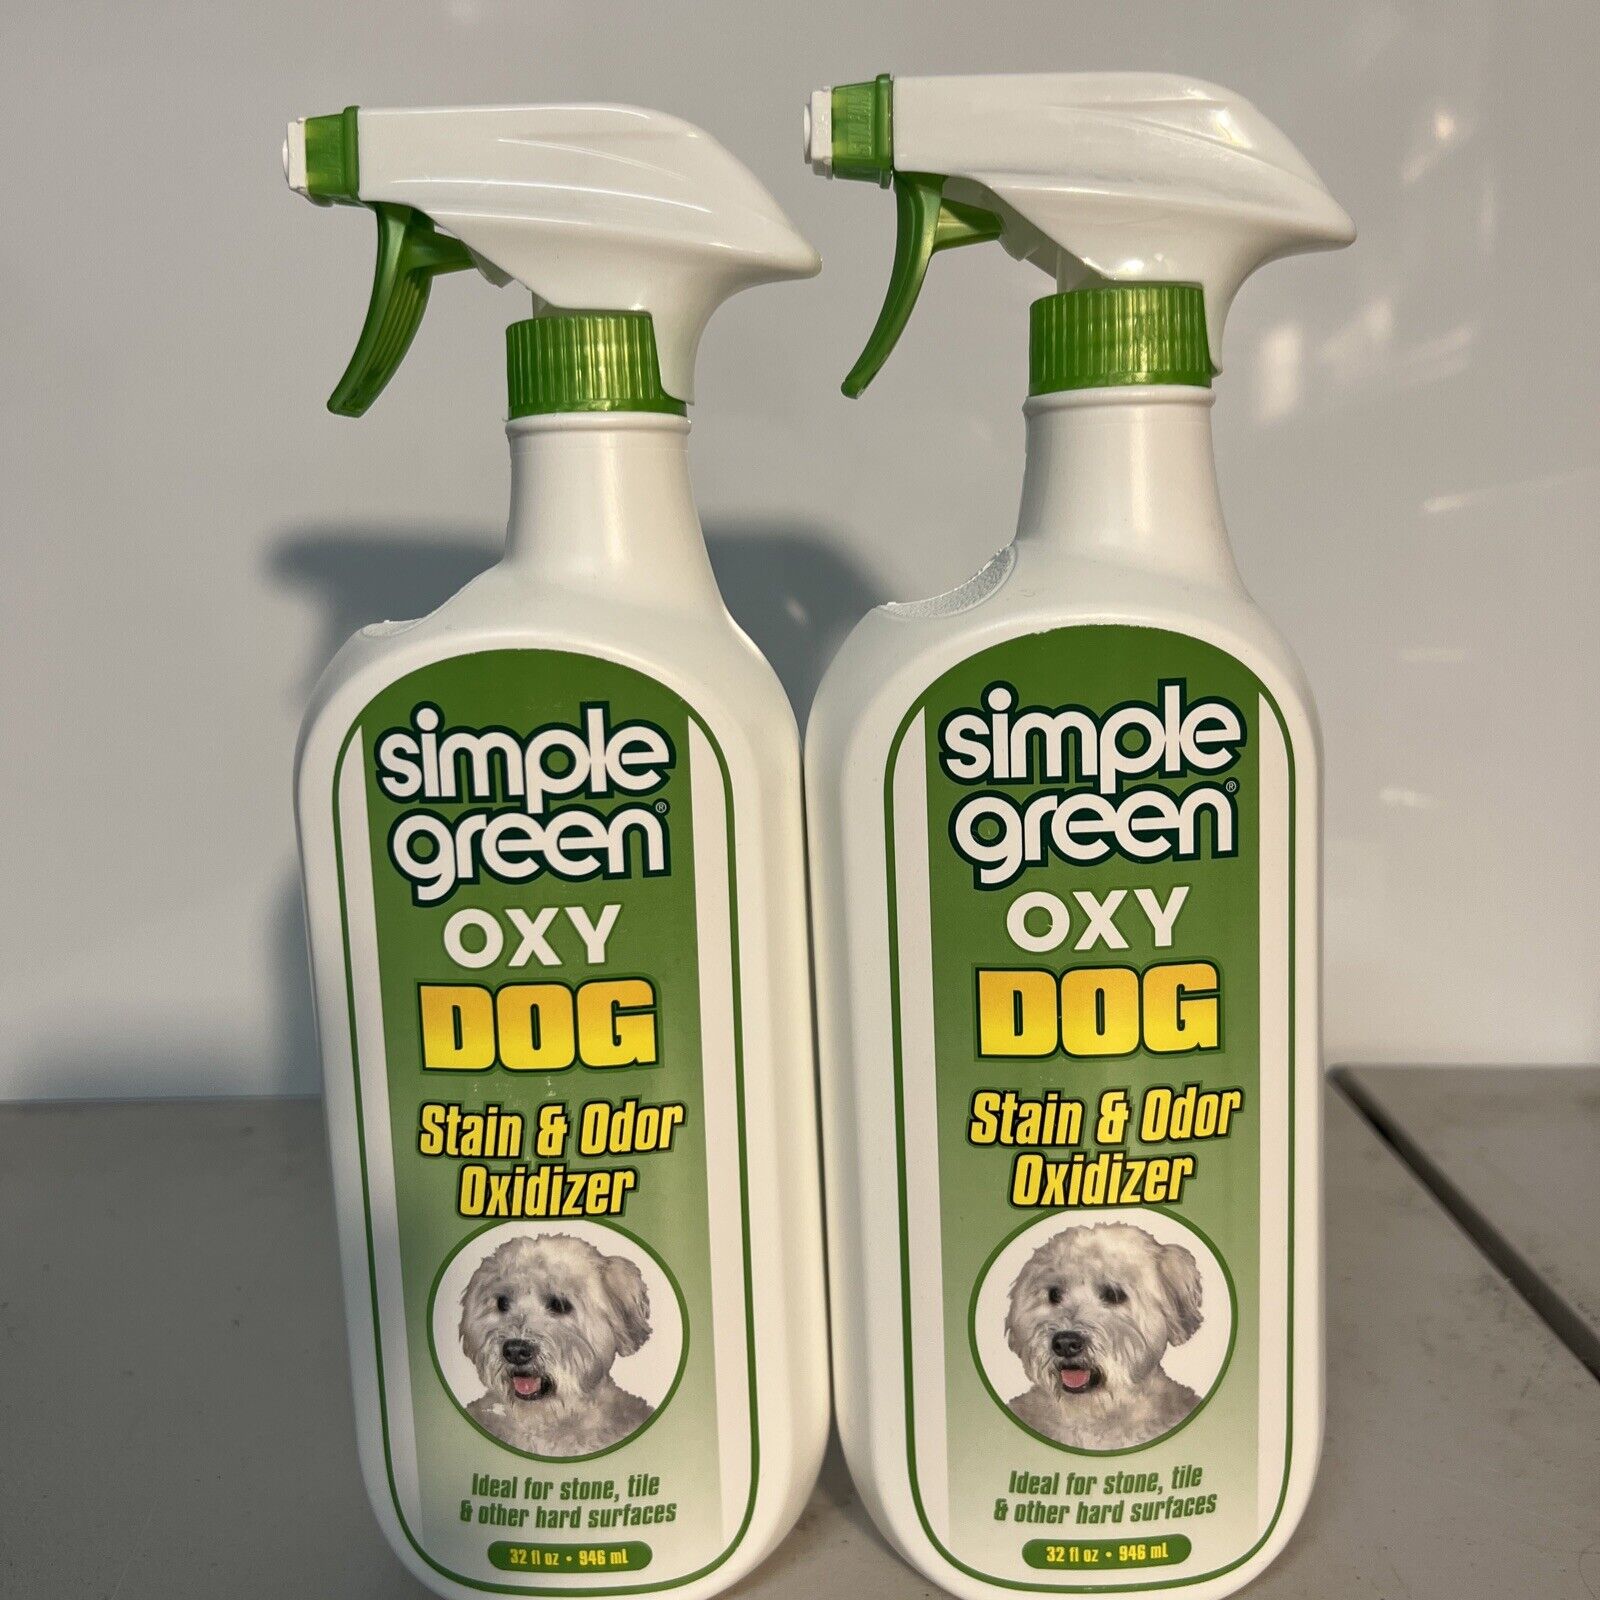 X2 Simple Green 32 Oz. Oxy Dog Pet Stain and Odor Oxidizer Bottles.